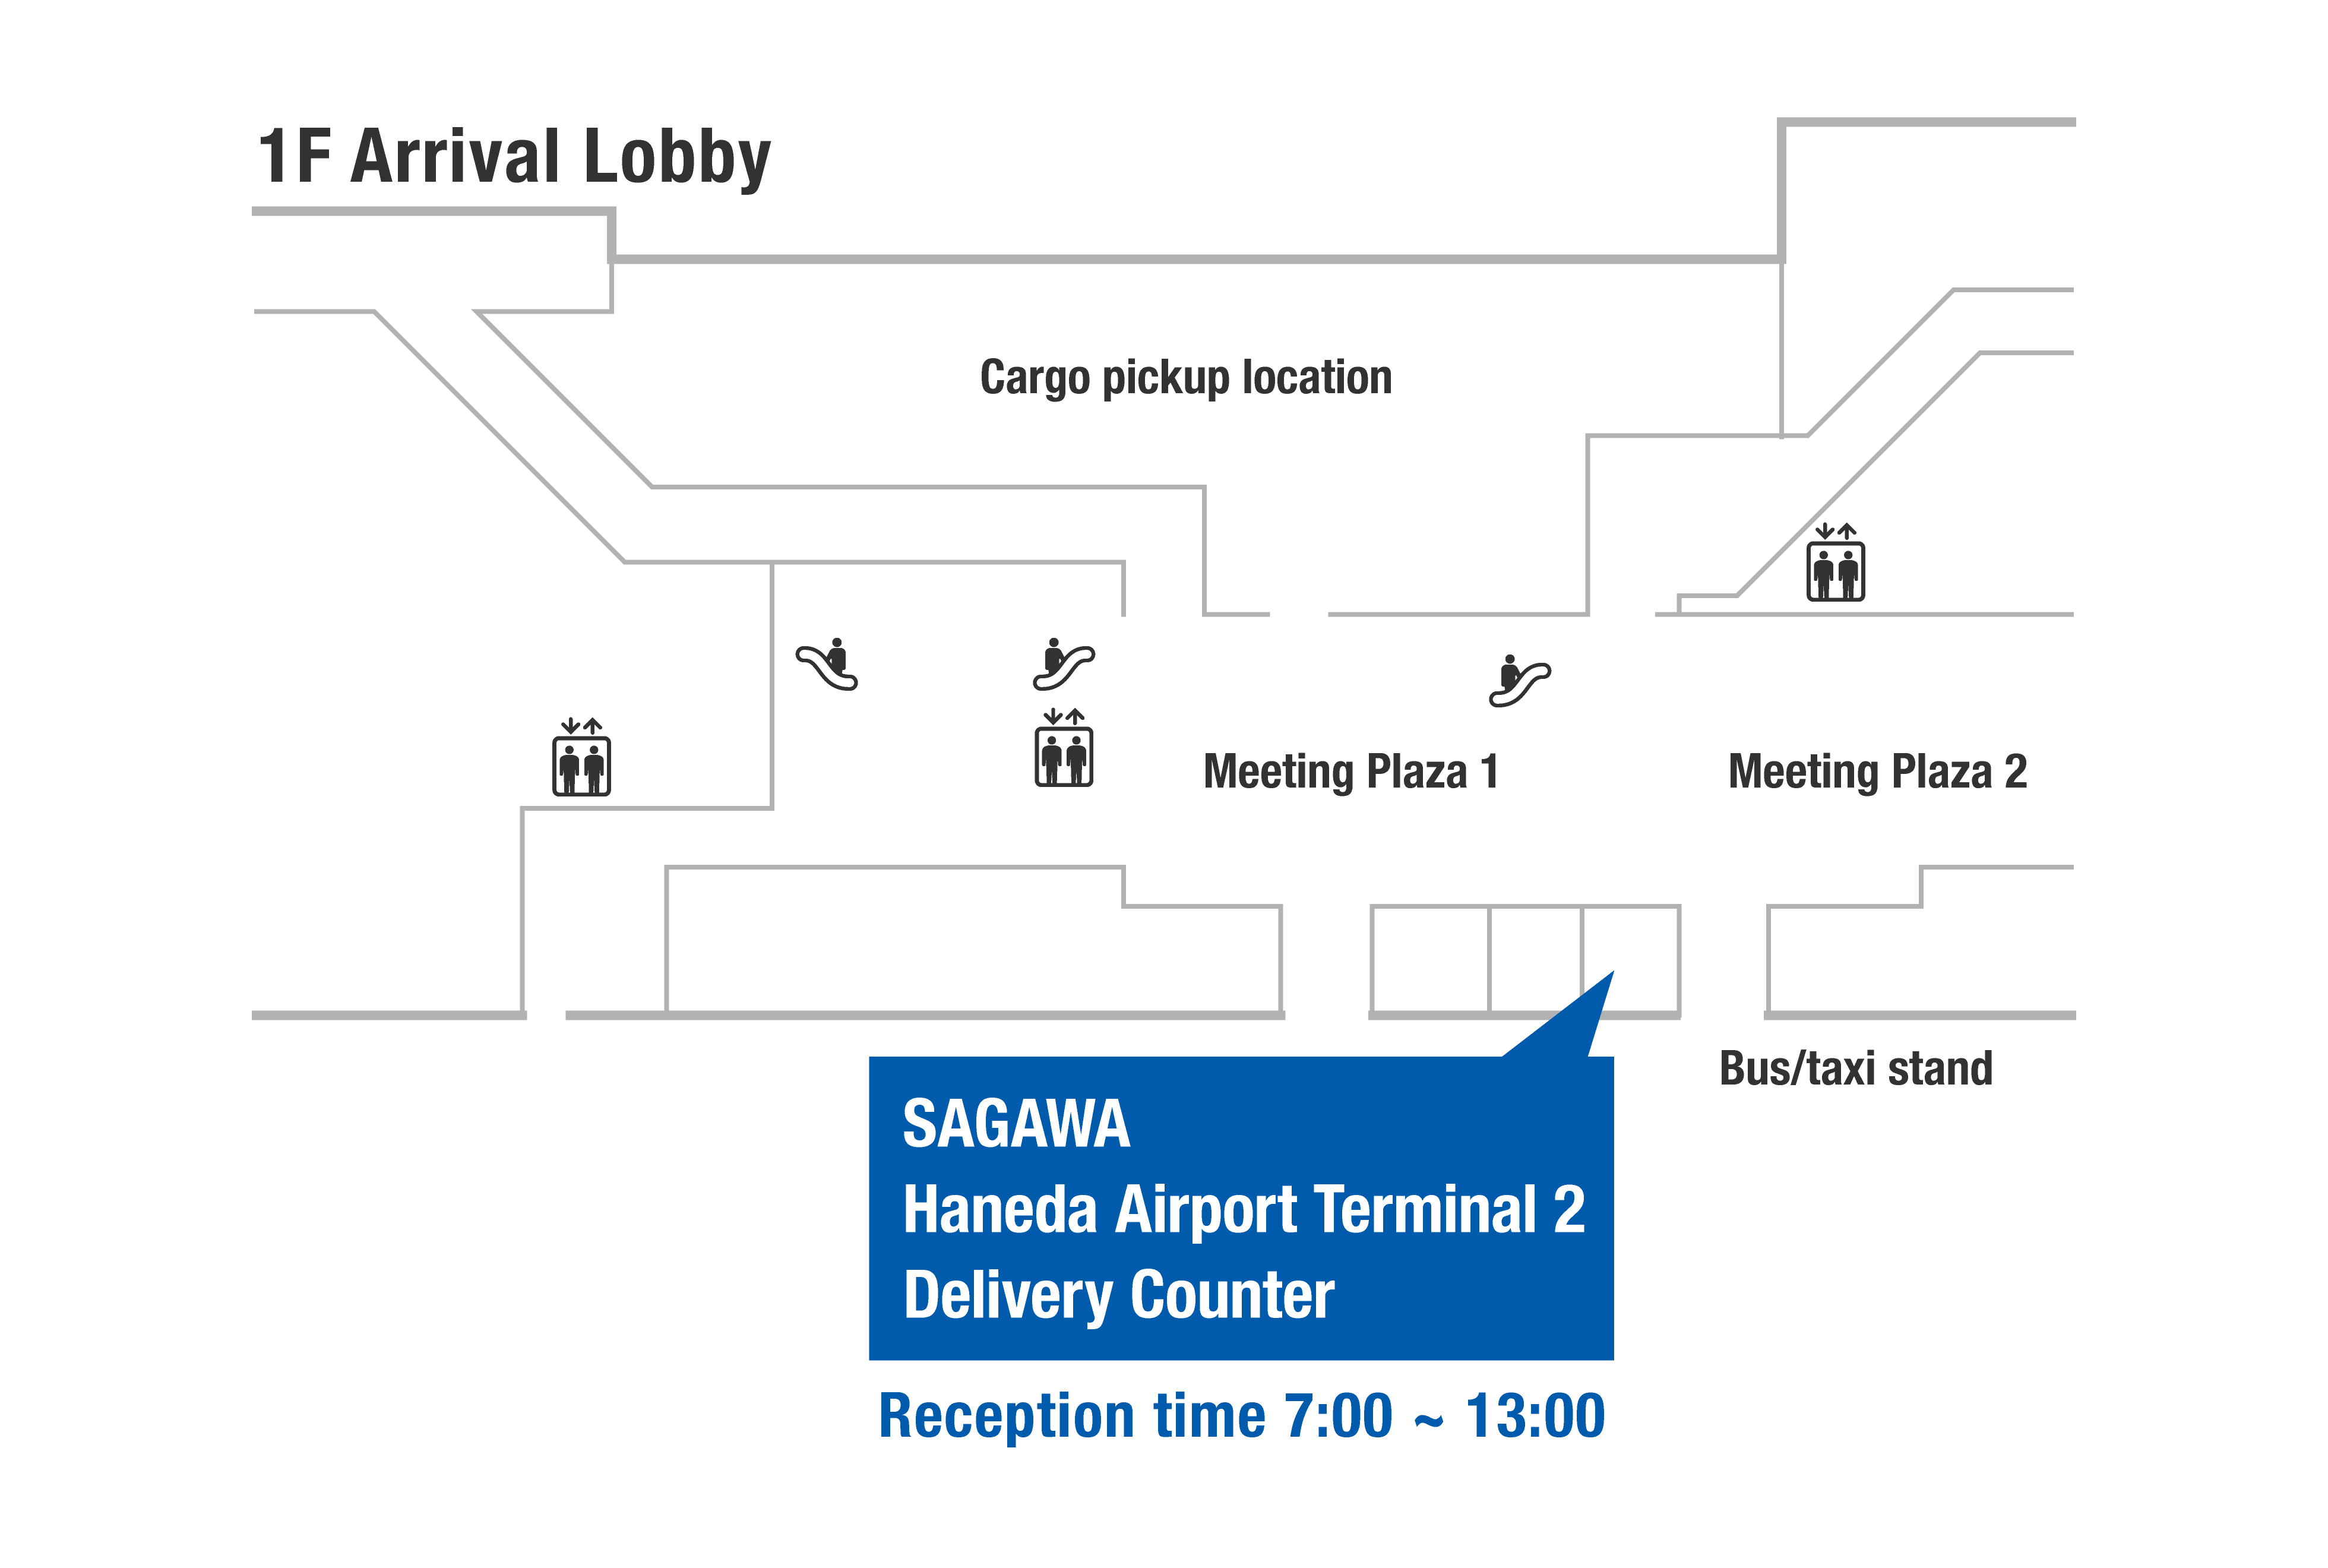 1F Arrival Lobby
Cargo pickup location
Meeting Plaza 1, Meeting Plaza 2
Bus/taxi stand
SAGAWA Haneda Airport Terminal 2 Delivery Counter
Reception time 7:00 ~ 13:00